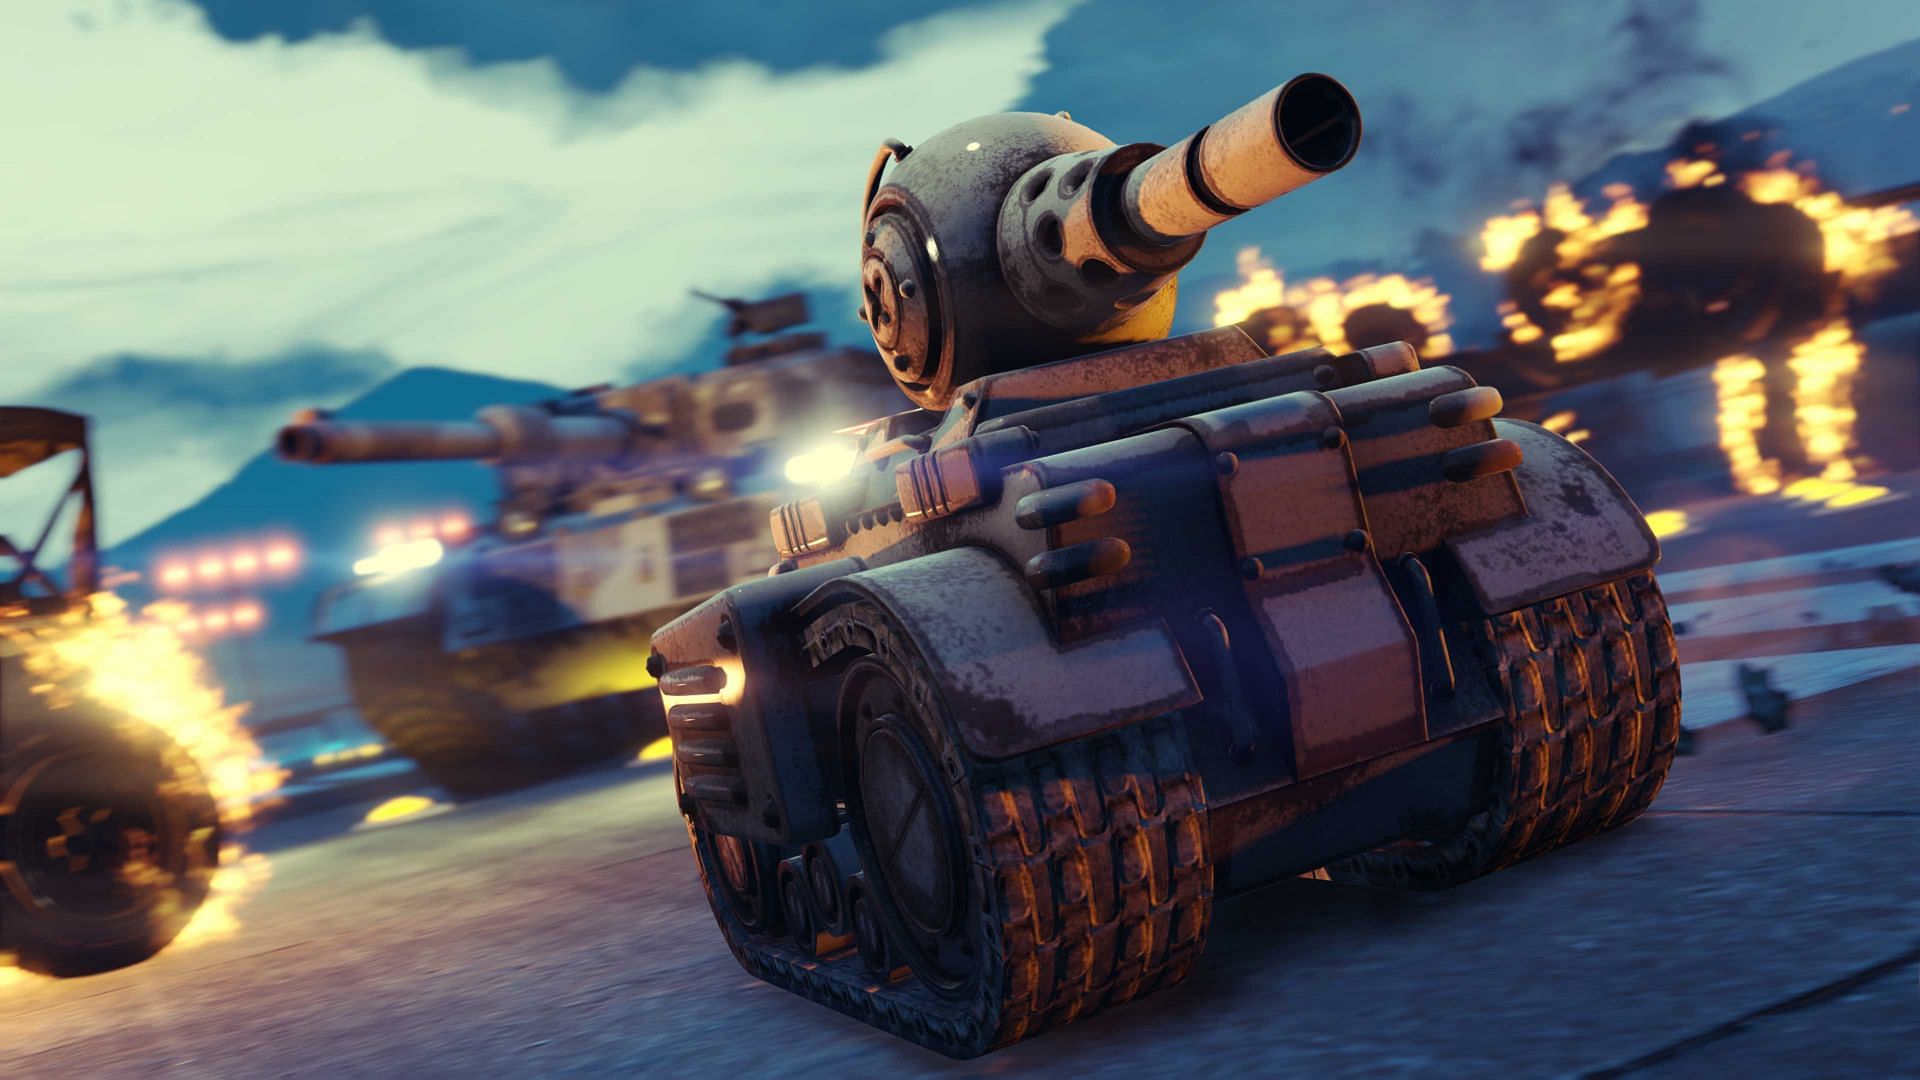 There are many fun weaponized vehicles in GTA Online (Image via Rockstar Games)